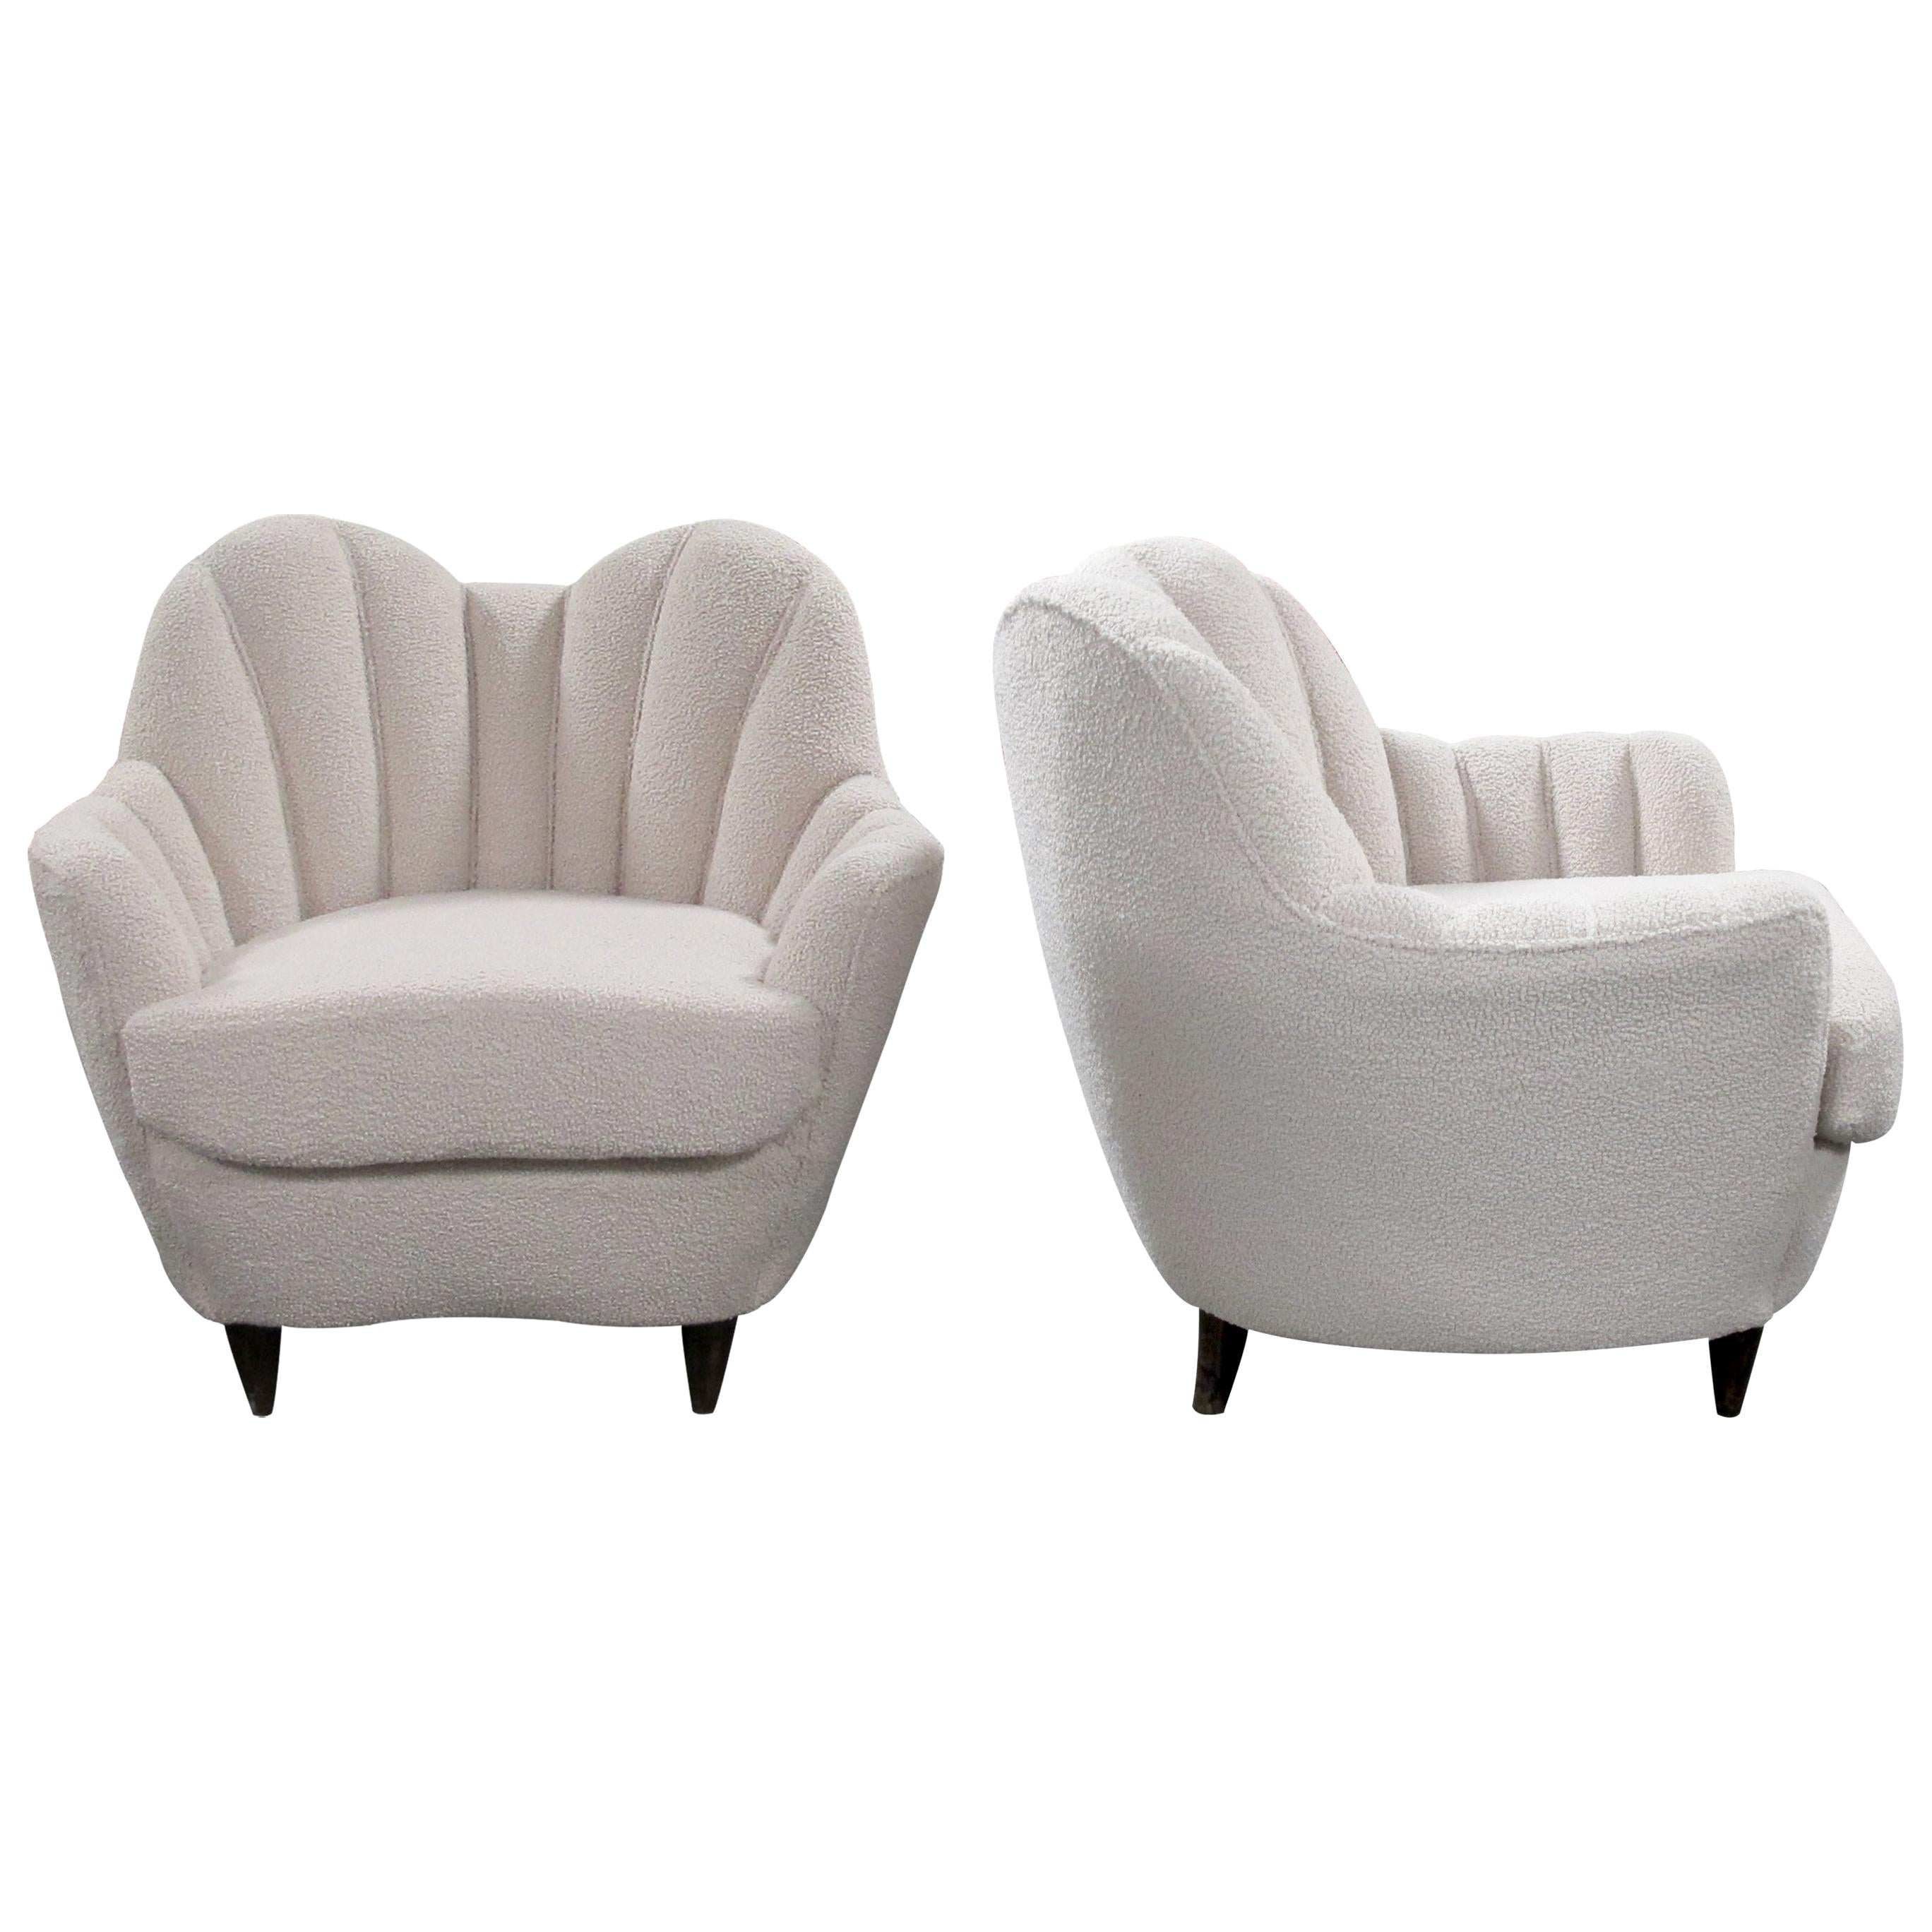 Pair of 1940s Italian Scallop Shaped Armchairs in the Style of Gio Ponti